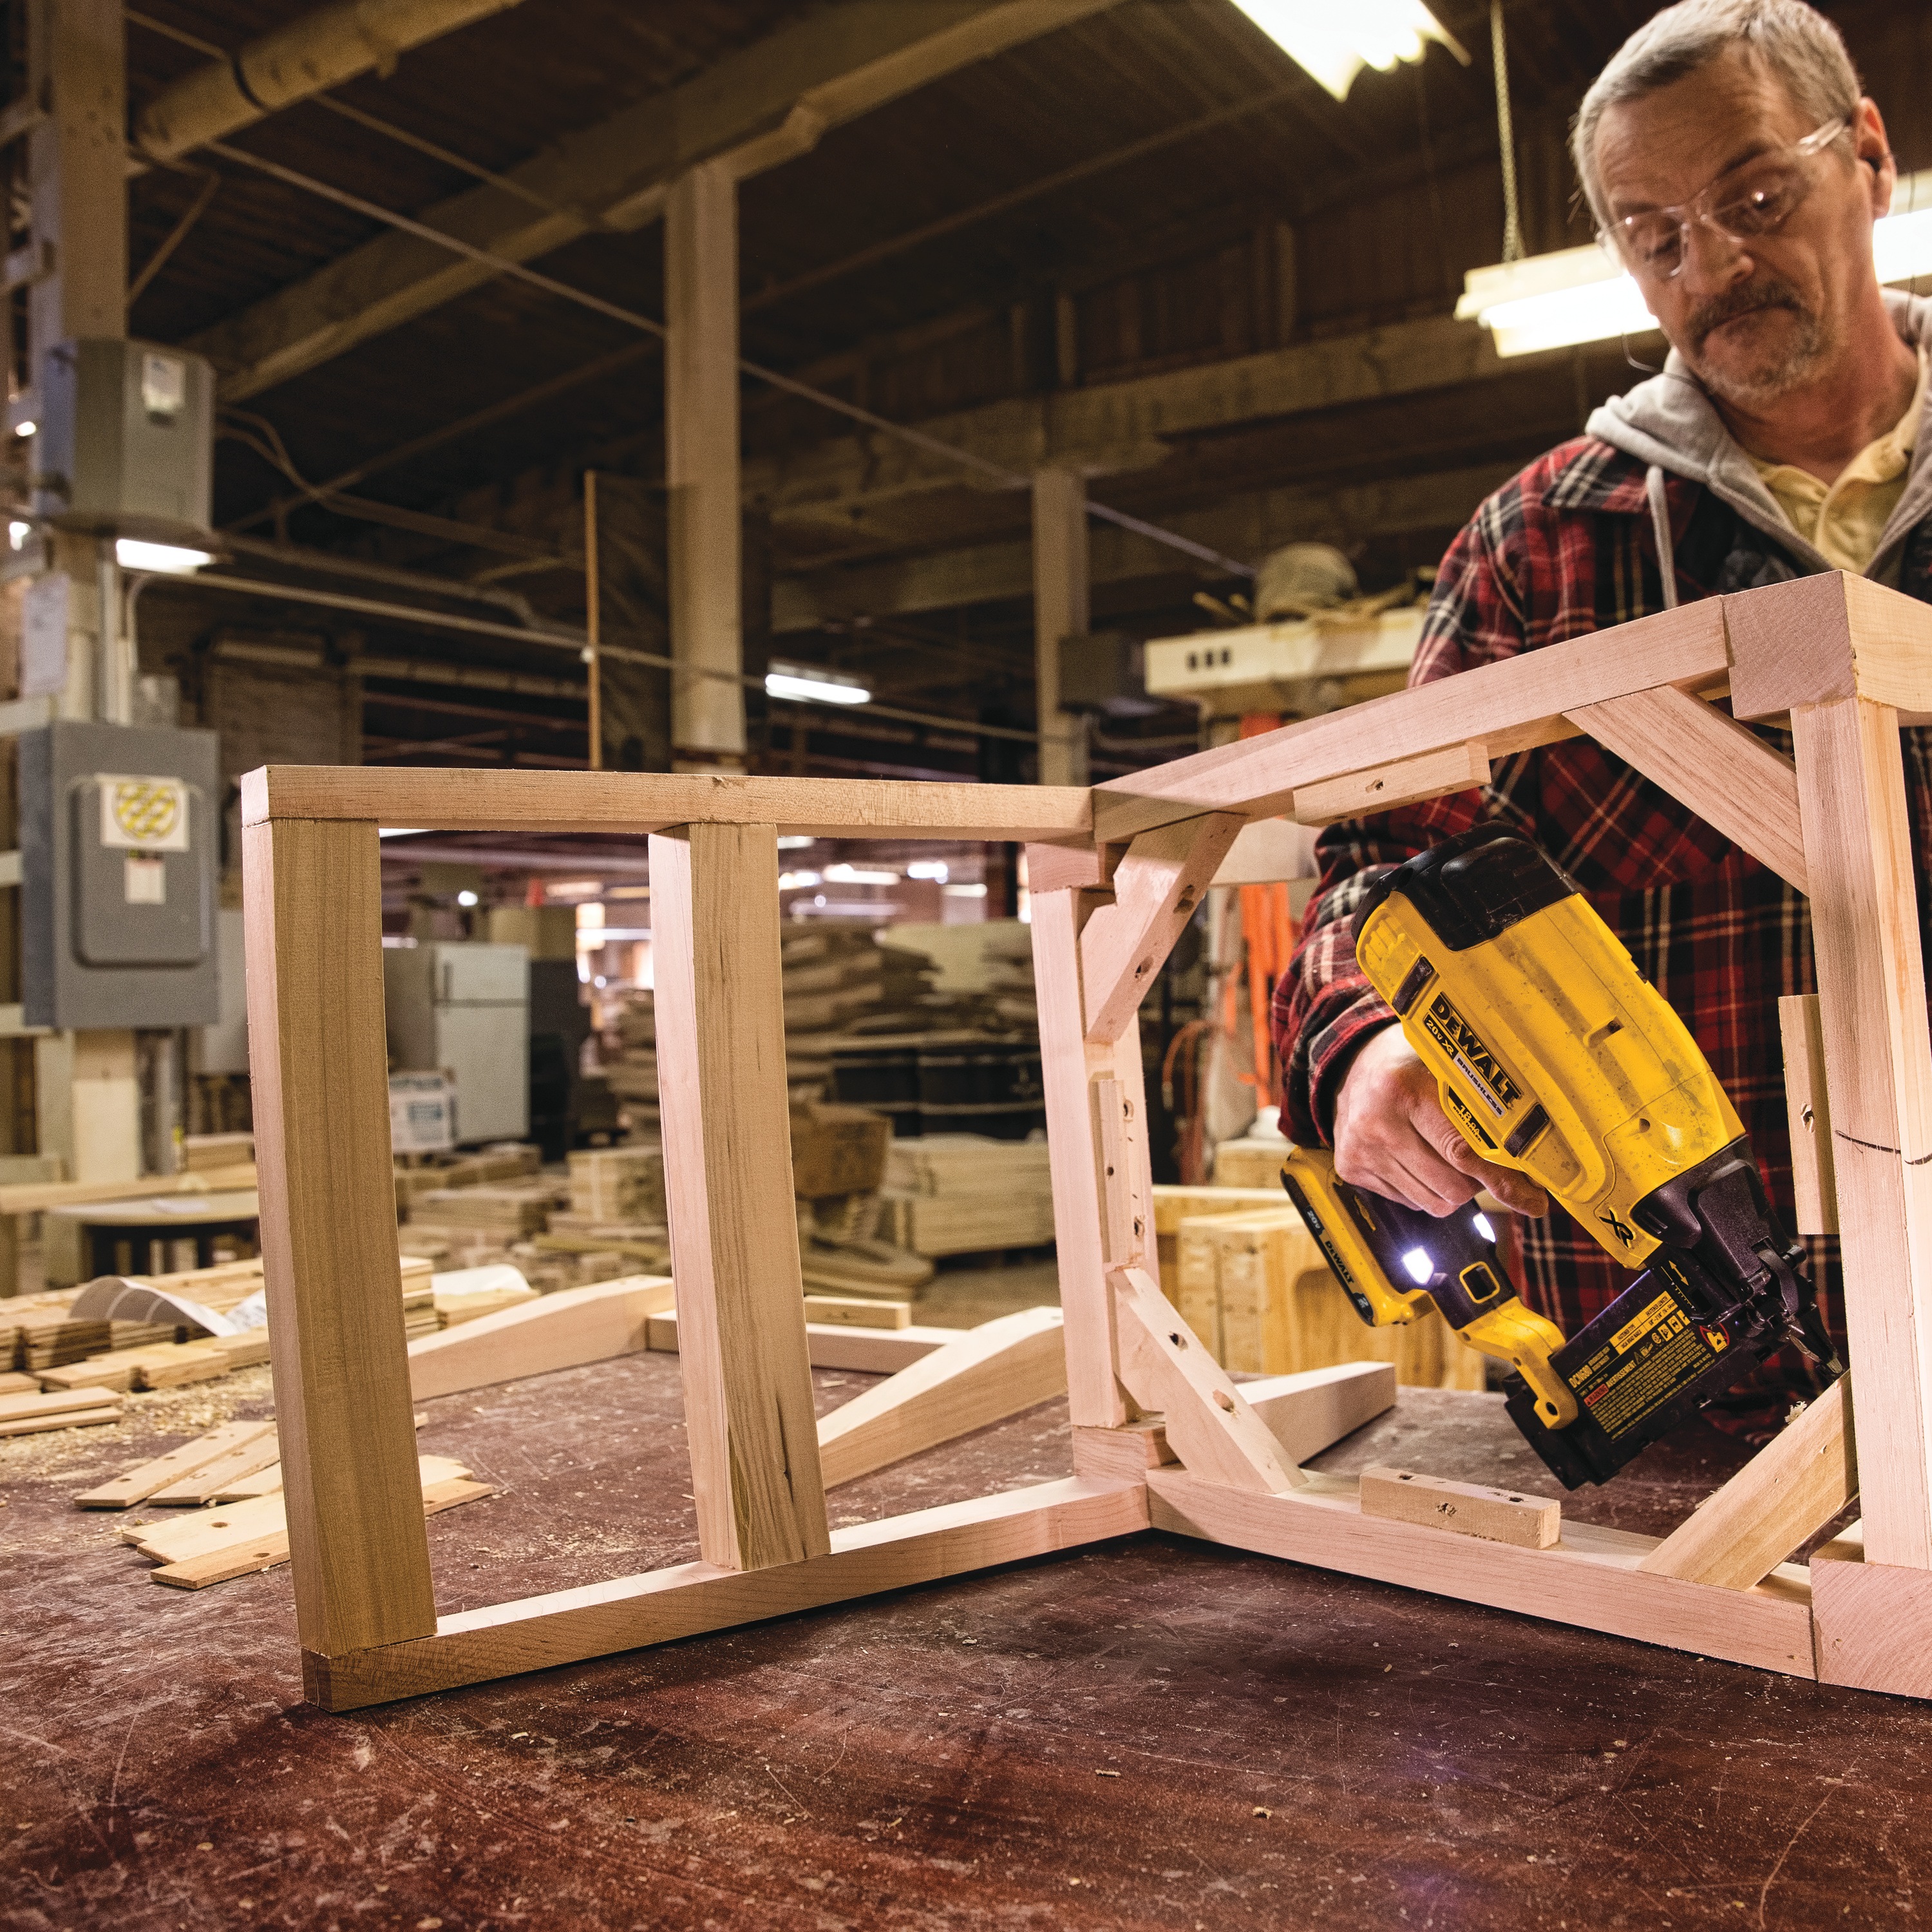 XR 18 gauge Cordless Brad Nailer in action on frame of a wooden chair by a construction worker